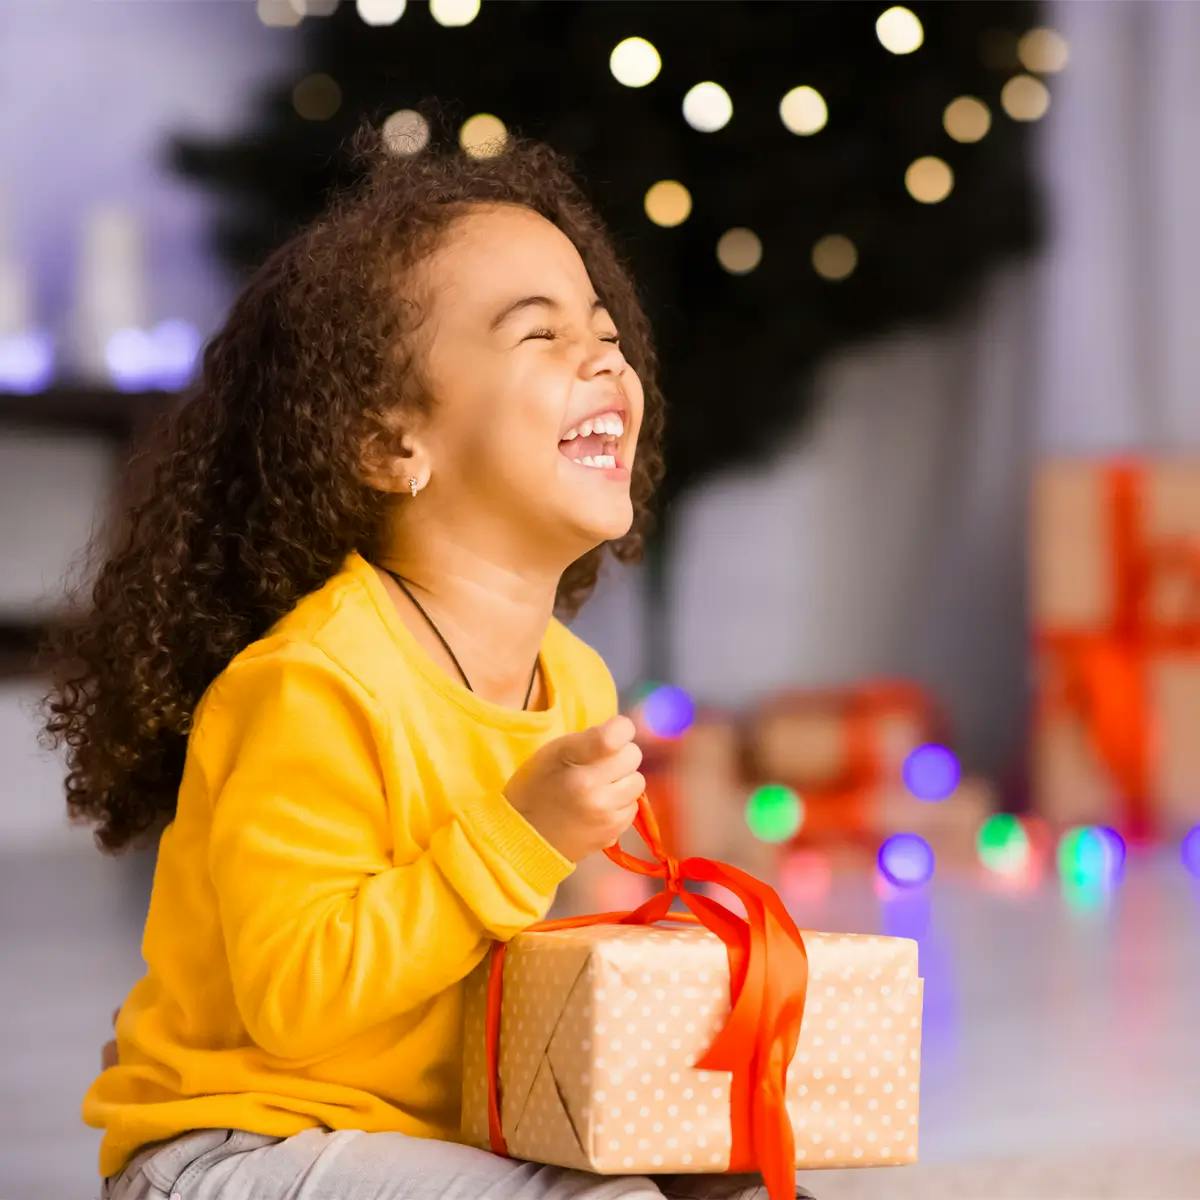 Excited Black girl laughing with Christmas gift, with blurred gifts and Christmas tree in background